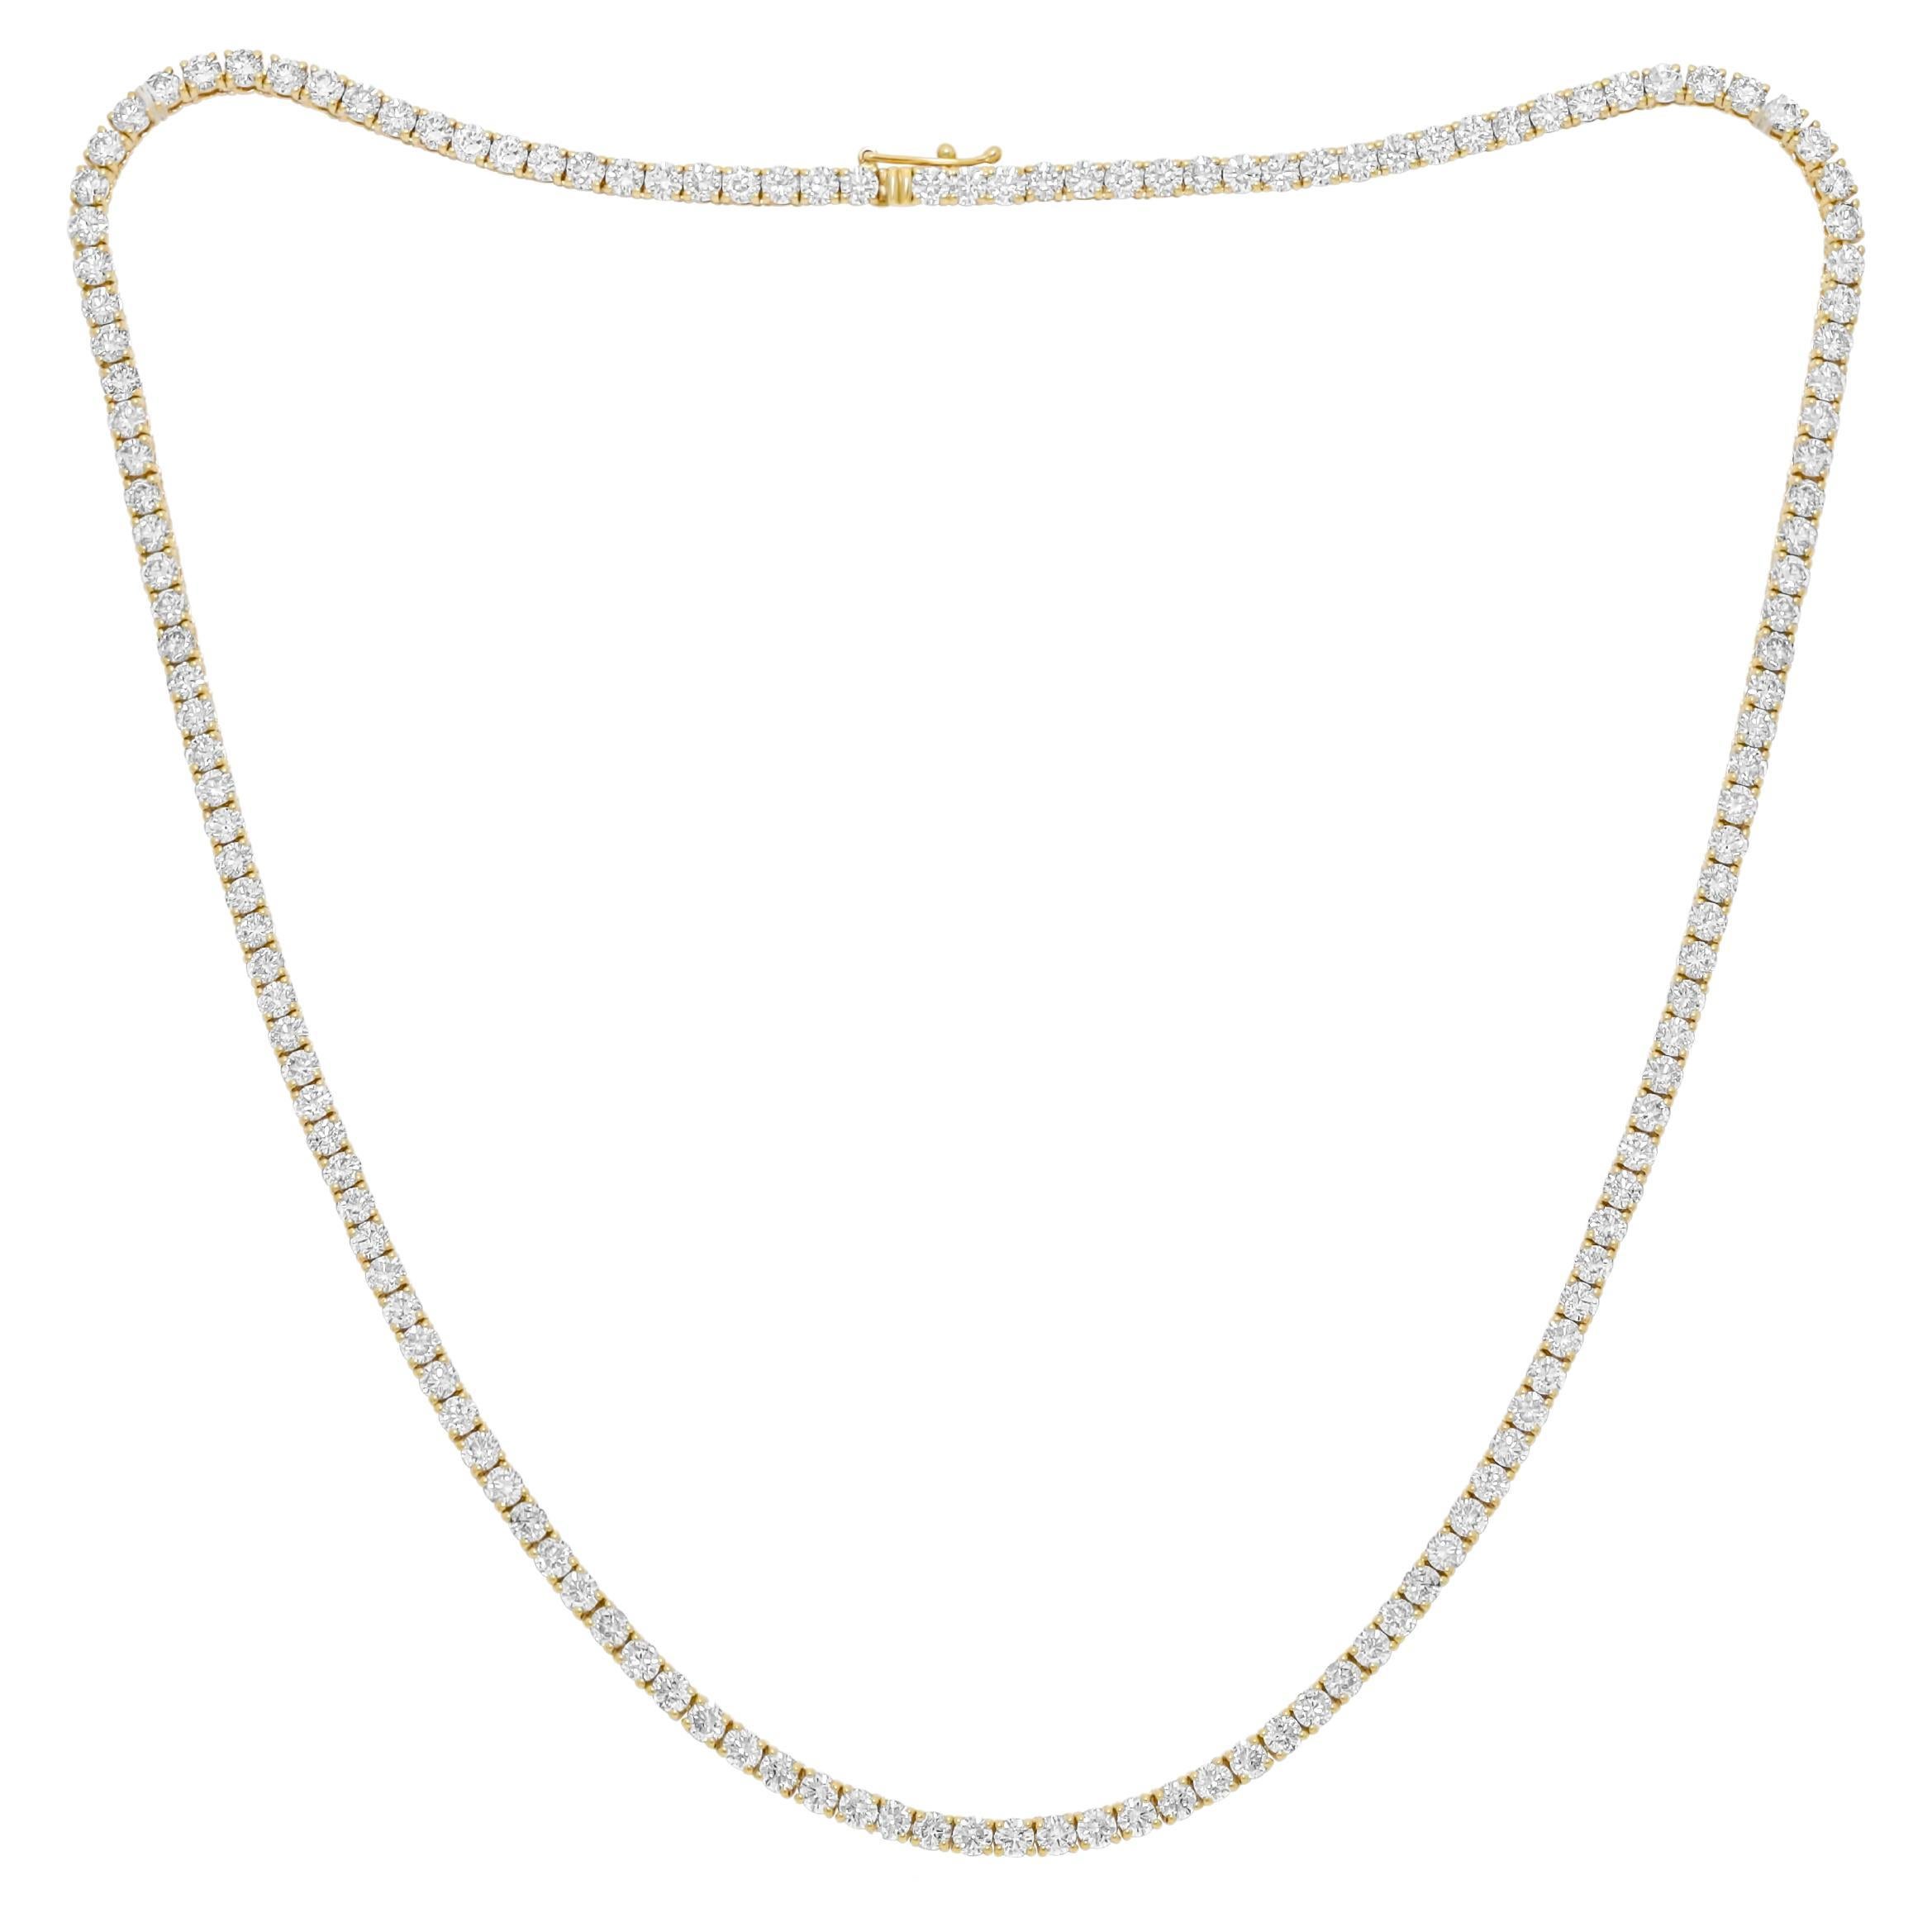 Diana M. Custom 23.30 Cts 4 Prong Round Diamond 18k Yellow Gold Tennis Necklace  For Sale